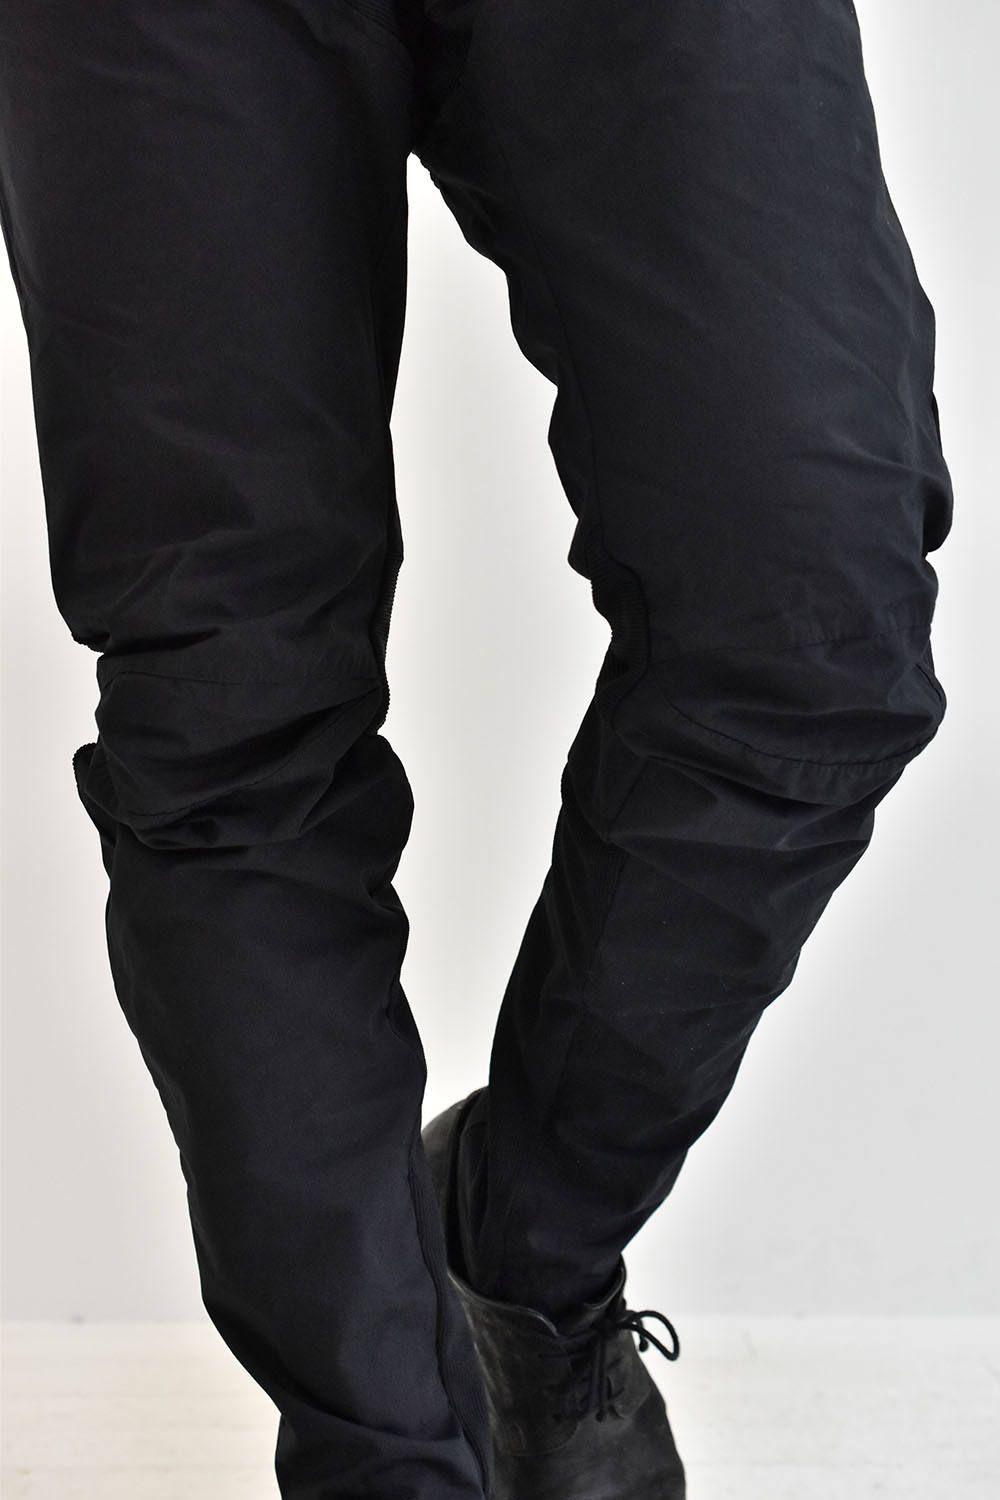 ARTICULATED PANTS.